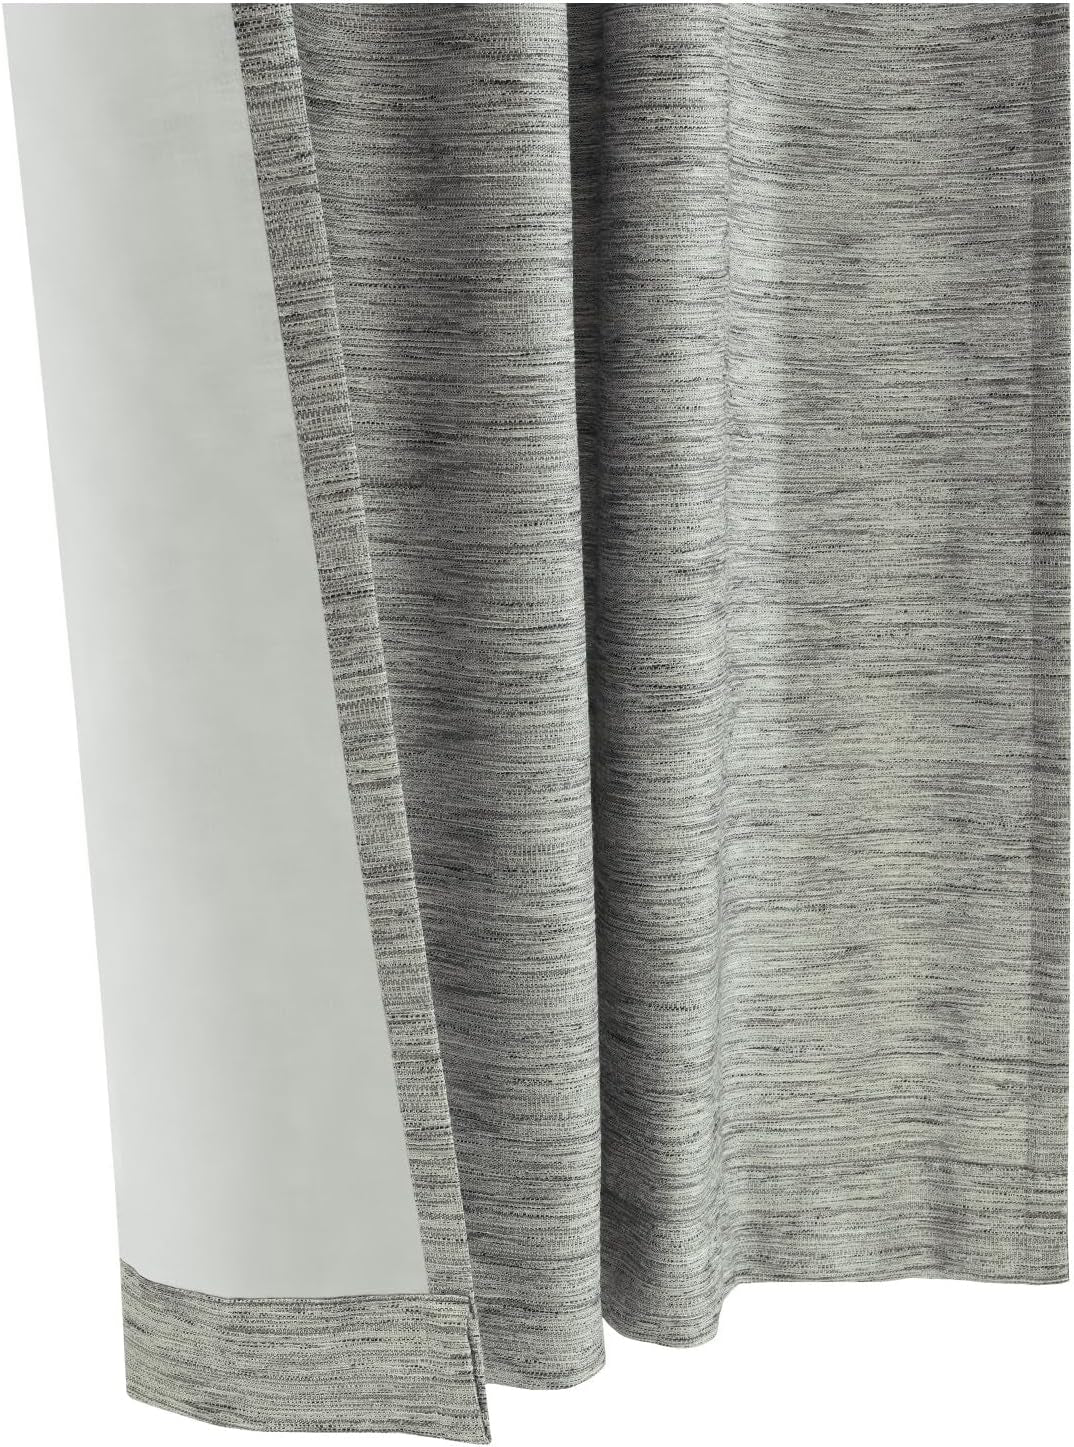 Oshawa Light Filtering Dual Header Curtain Panel 52 X 95 in Grey  Commonwealth Home Fashions   